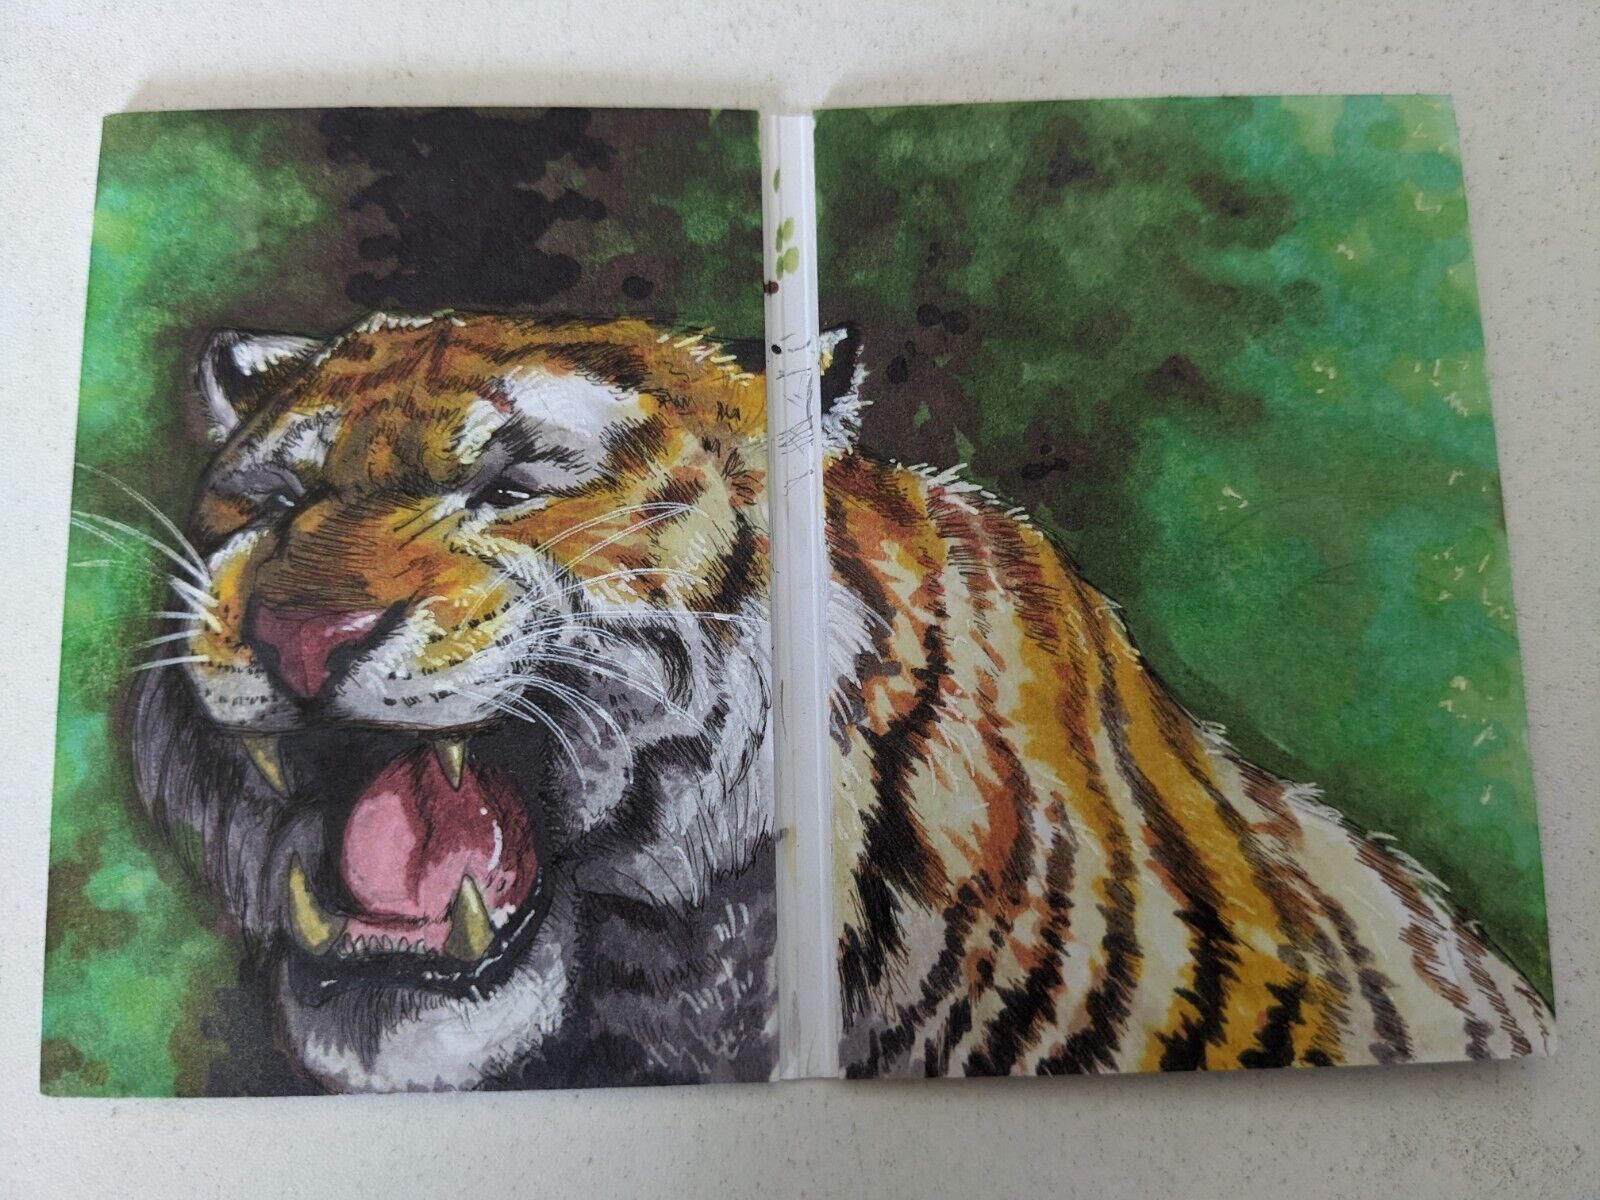 2018 UD Goodwin Champions The Jungle Book 1/1 Shere Khan Sketch by Elise Strong